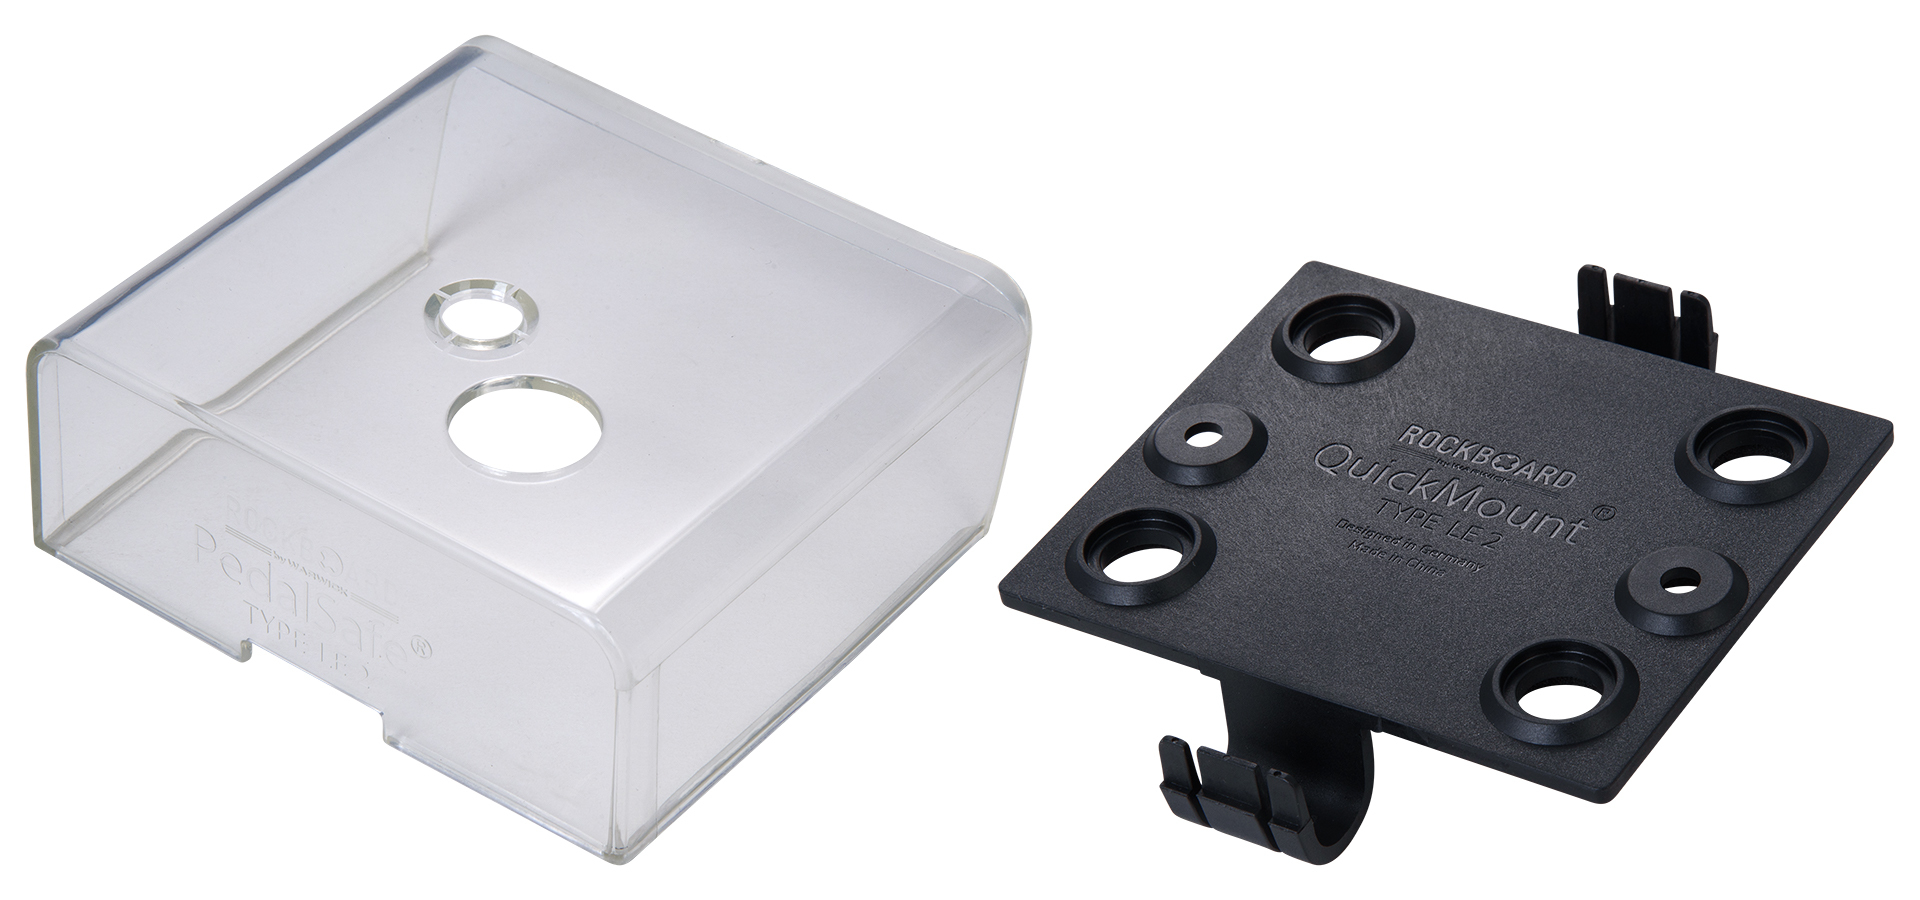 RockBoard PedalSafe Type LE2 - Protective Cover and Rockboard Mounting Plate for LEHLE Little Lehle III, SundayDriver SW II pedals